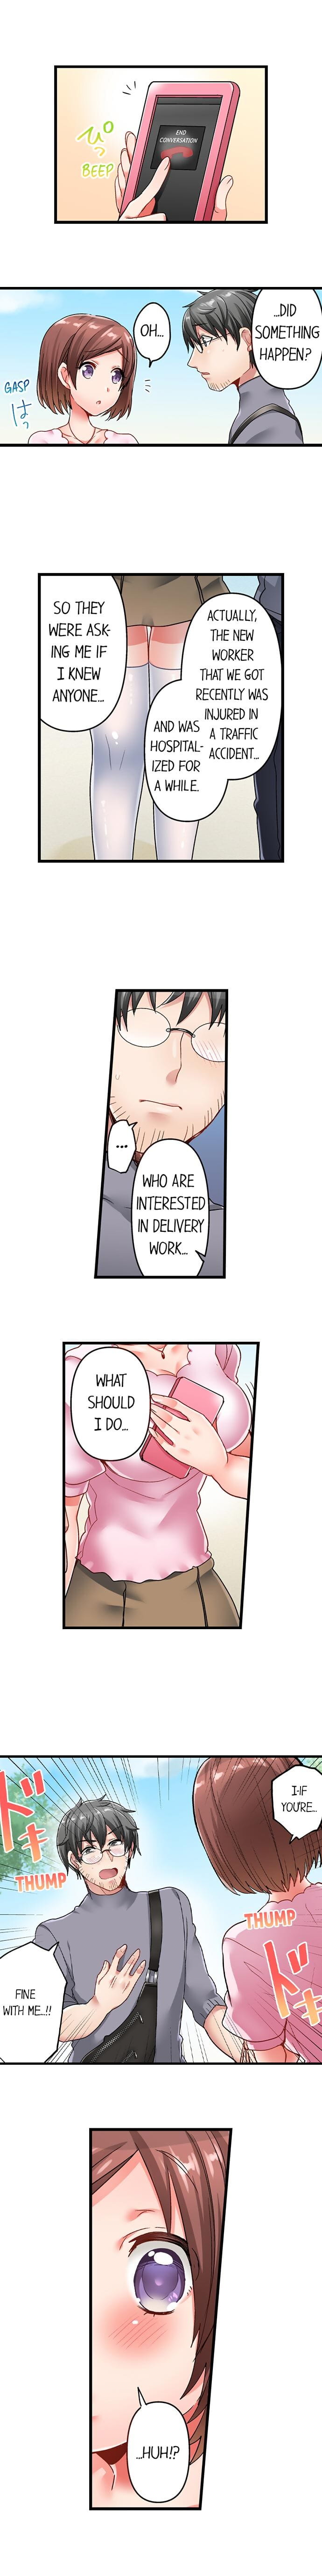 5-Second Sex Delivery - part 3